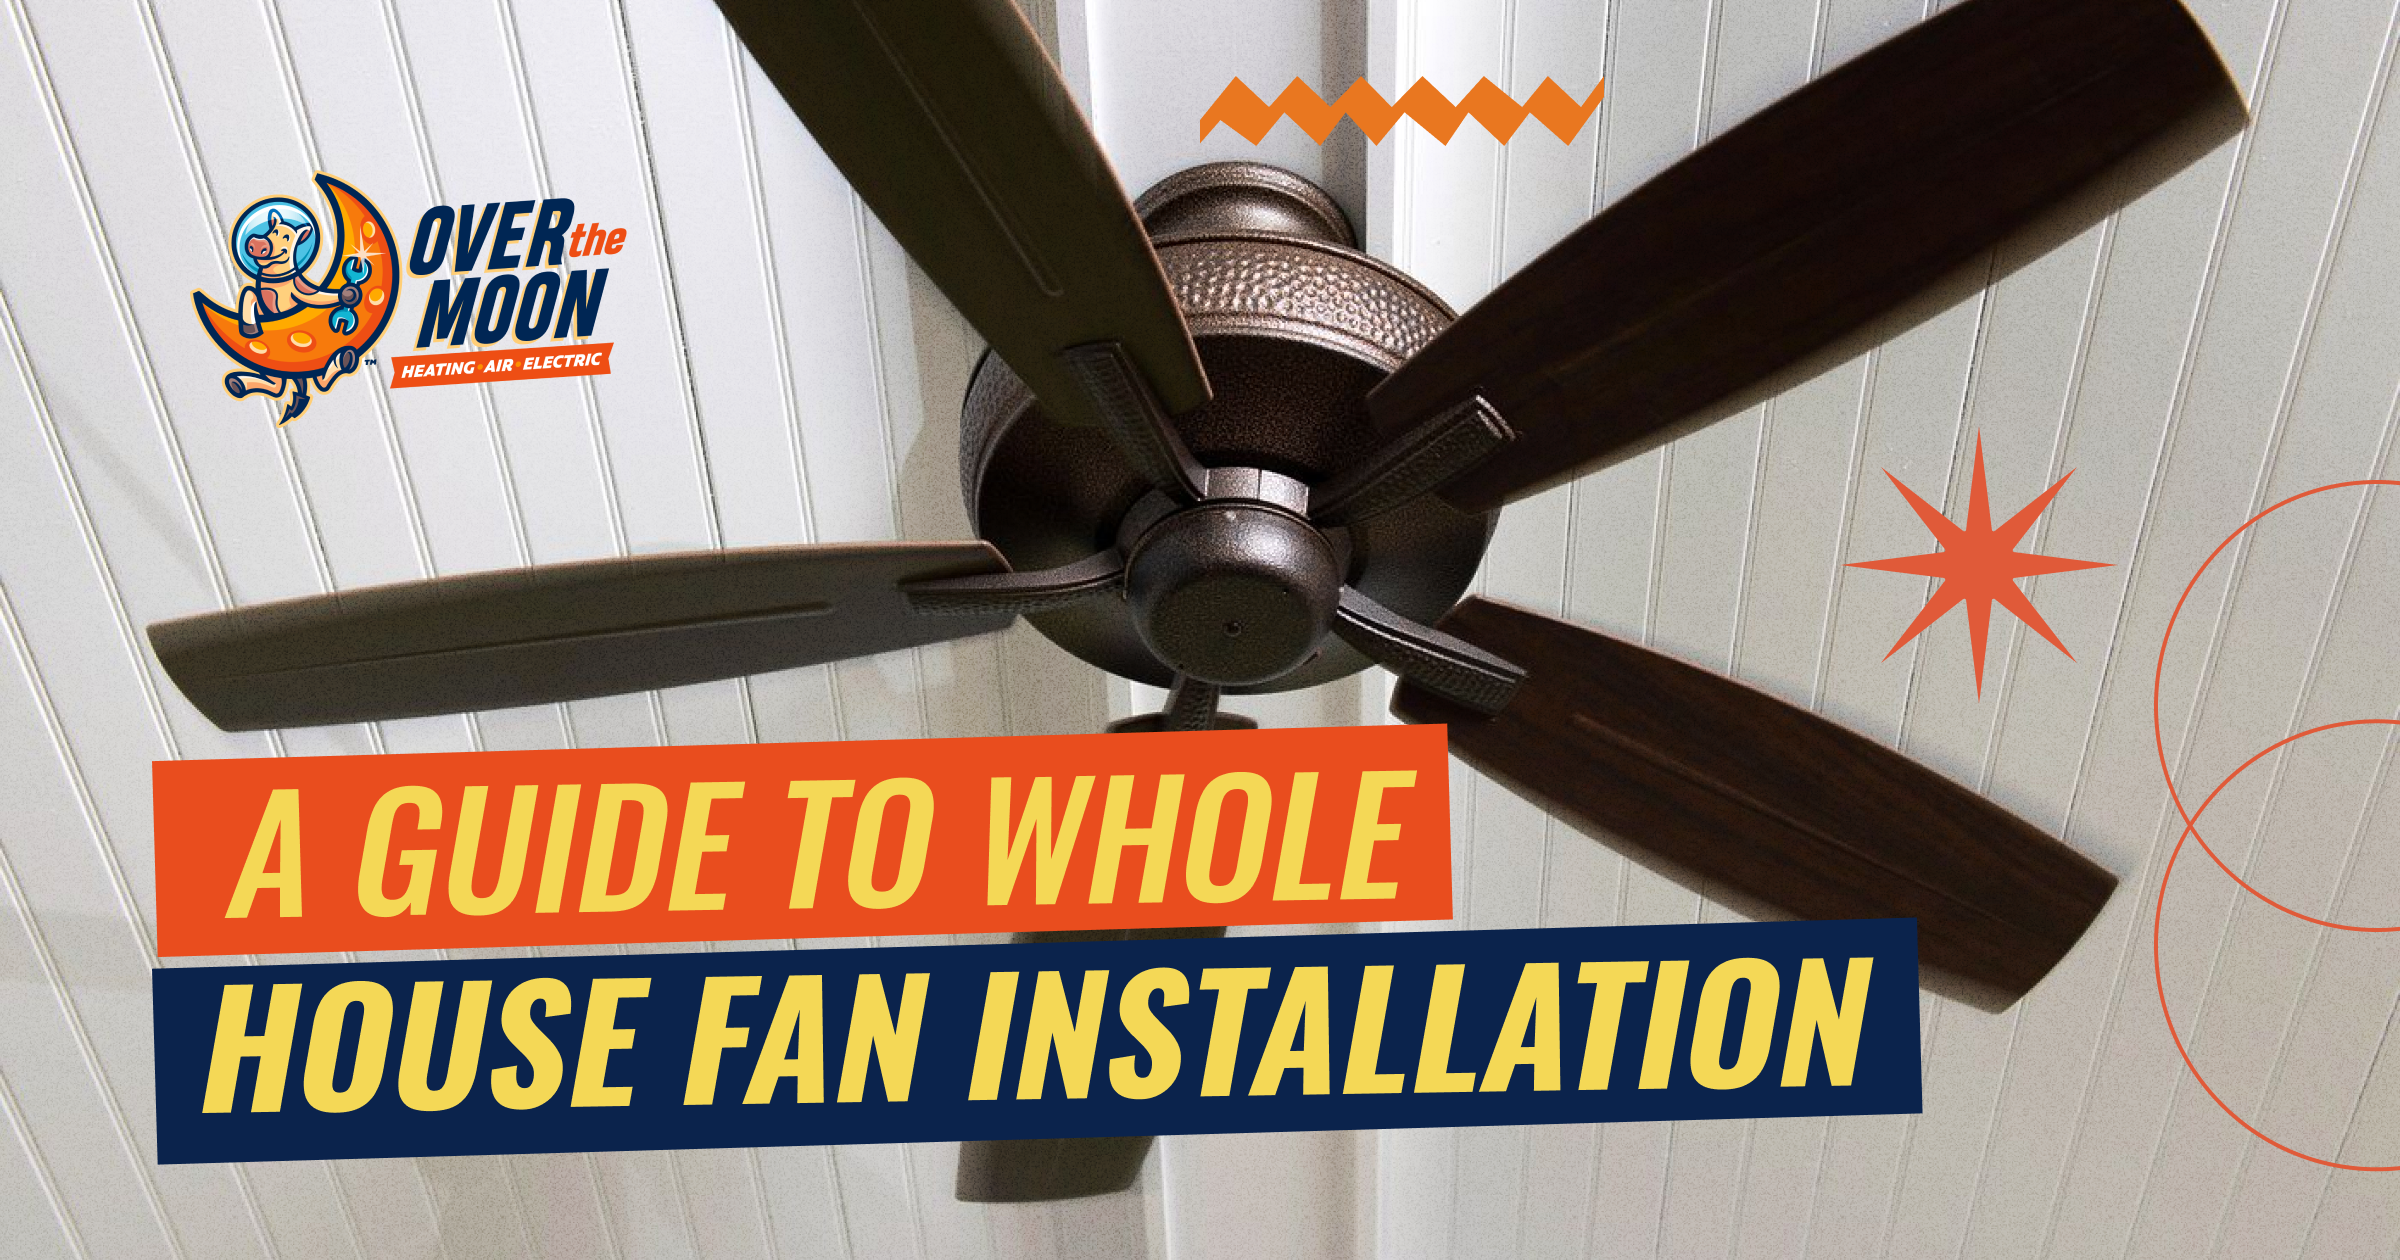 Over The Moon A Guide To Whole House Fan Installation (1)